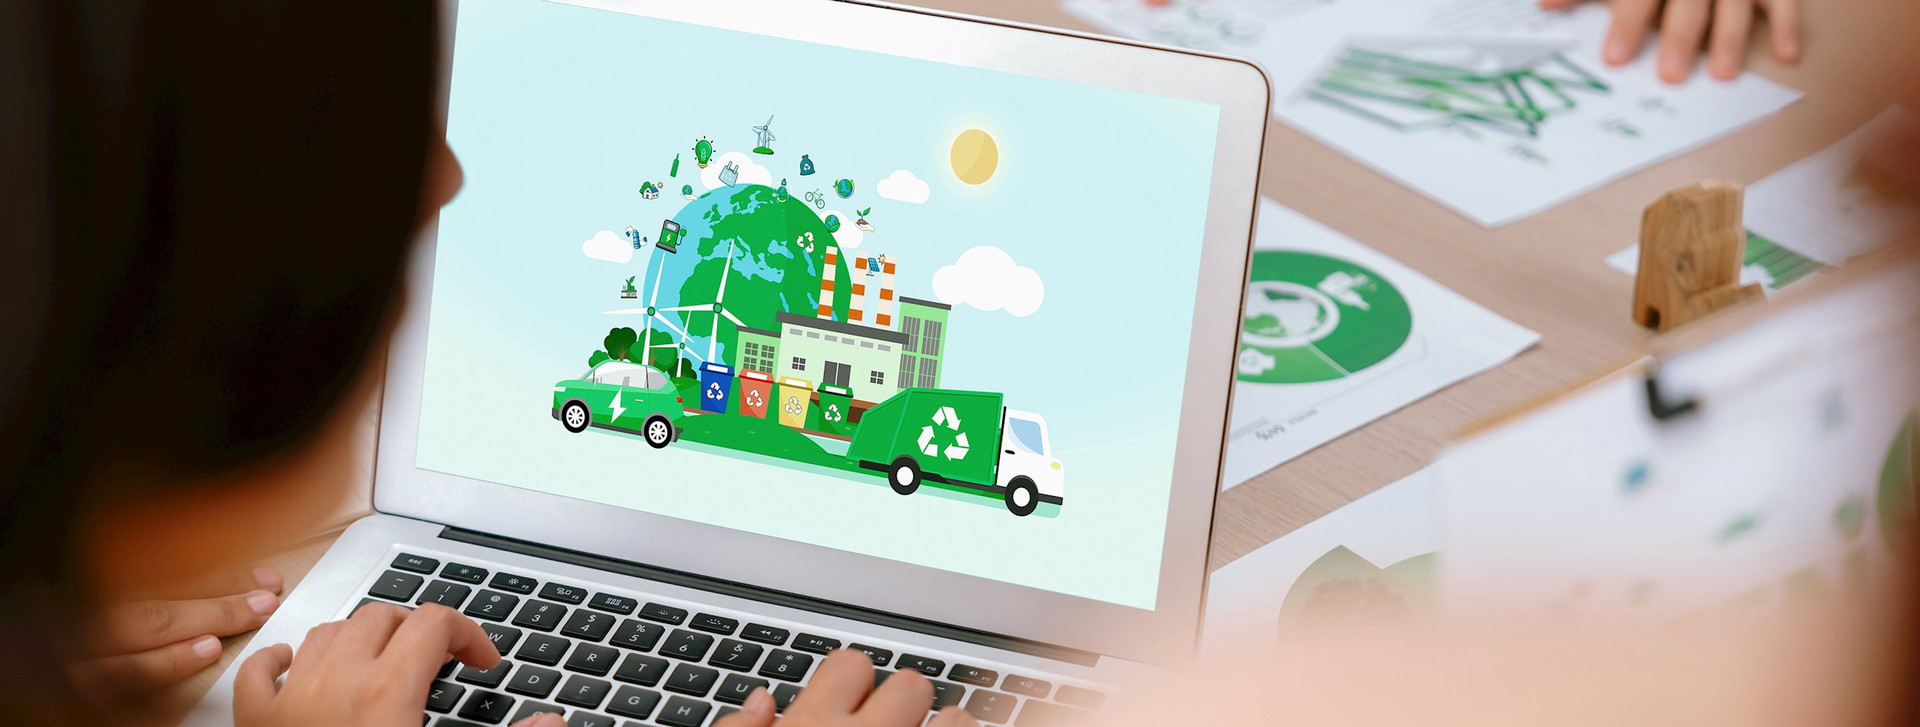 green-city-waste-management-illustrate-display-laptop-delineation.jpg